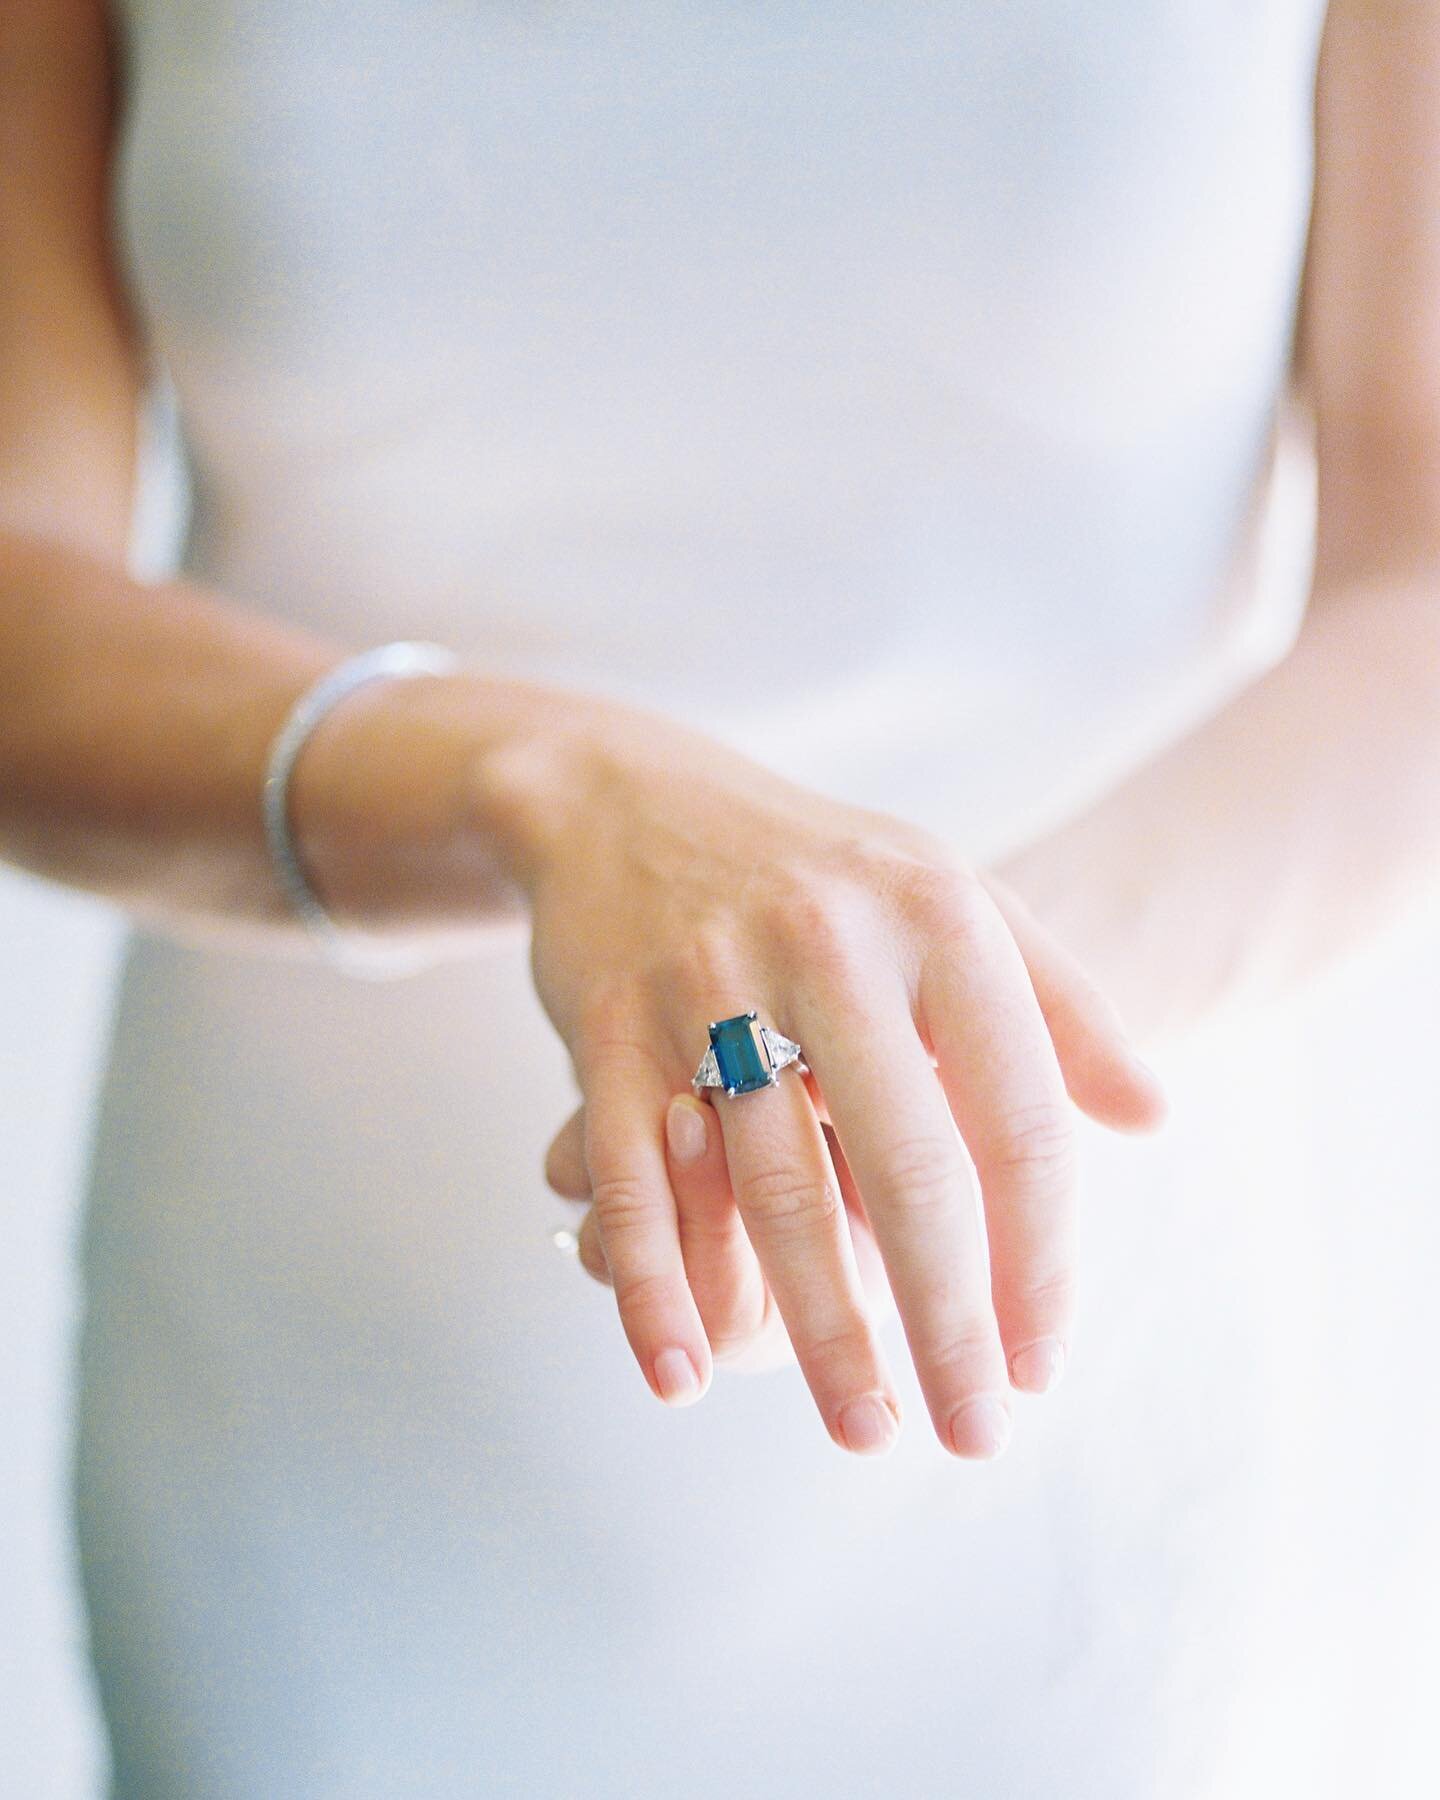 While I see &ldquo;norms&rdquo; set aside or altered fairly often, 98% of my couples exchange rings. This gorgeous sapphire was a family piece gifted to the bride on wedding day. Do you wear an heirloom ring? Anyone have a ring that&rsquo;s not diamo